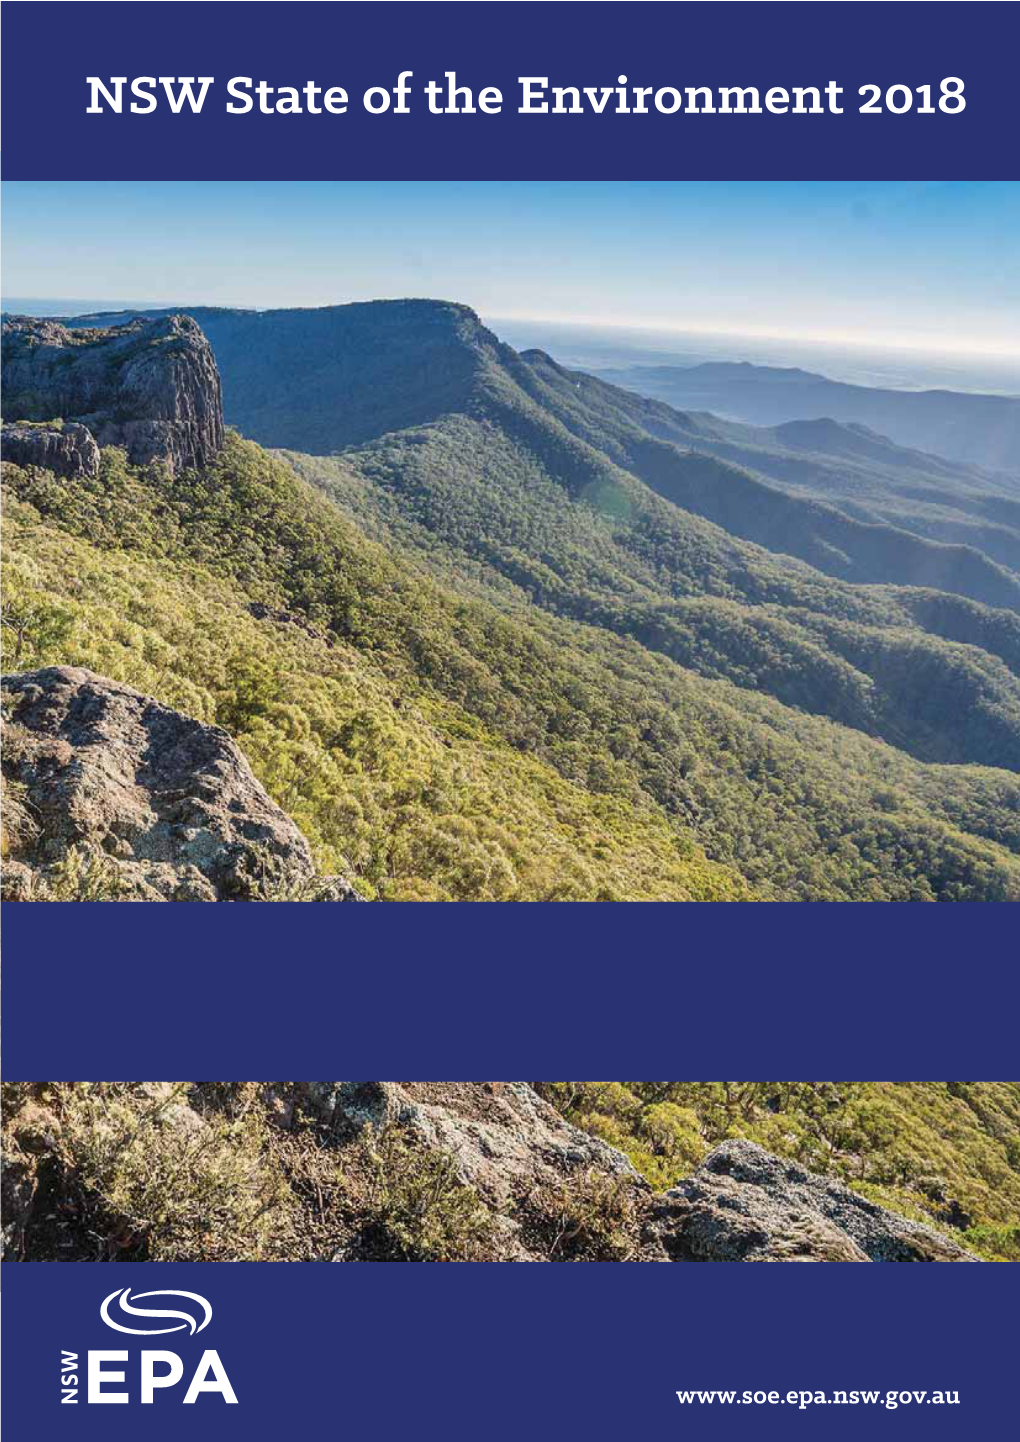 NSW State of the Environment 2018